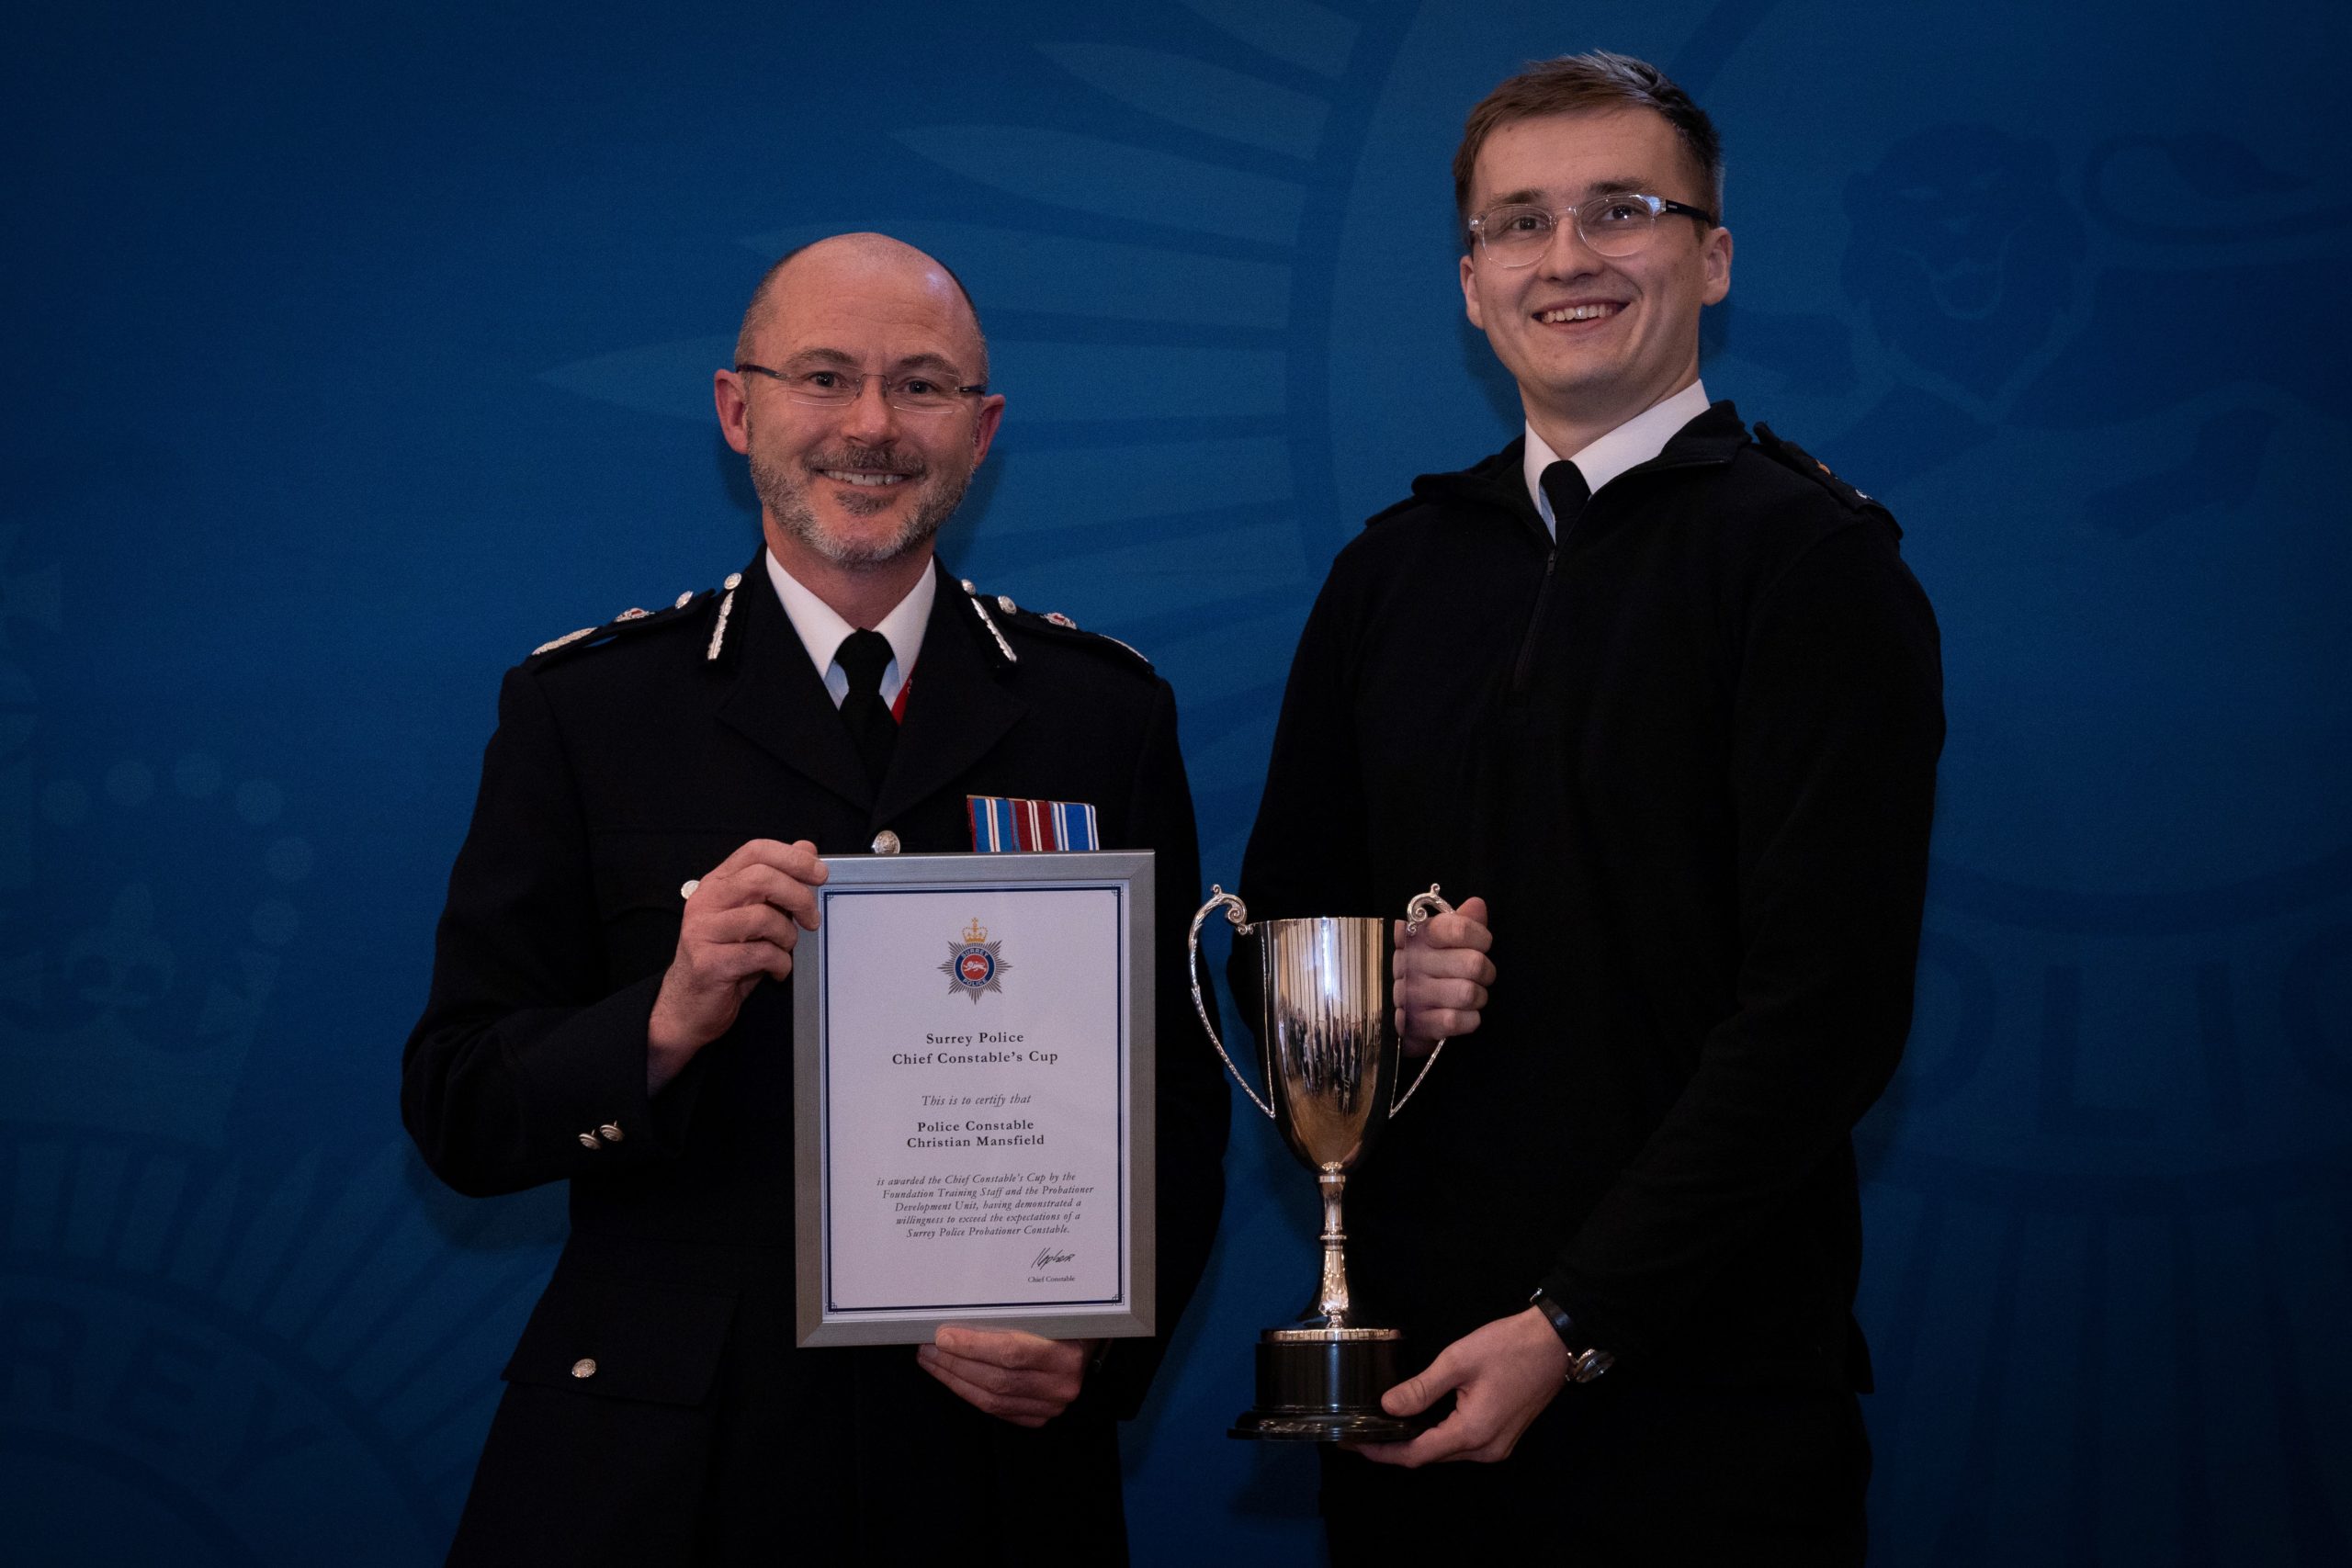 Chief Constable Gavin Stephens and PC Mansfield